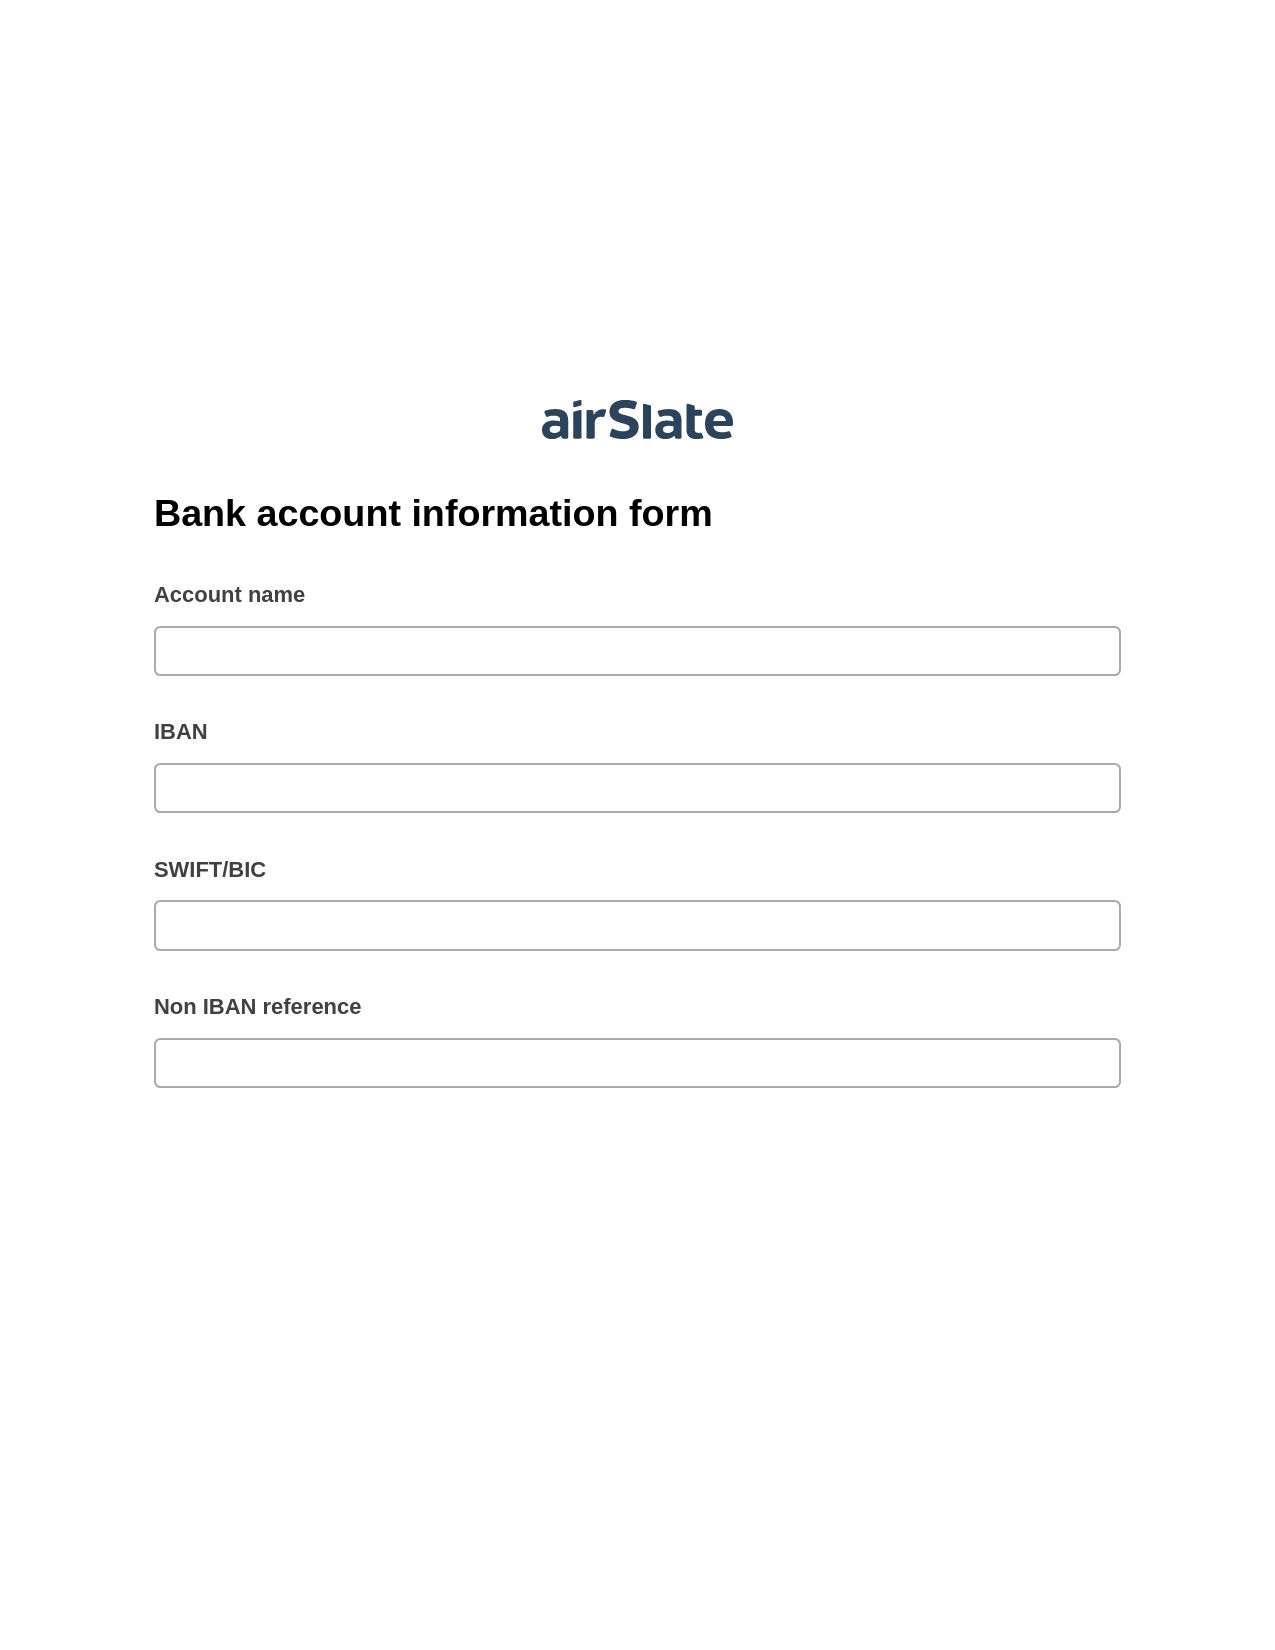 Bank account information form Pre-fill from Google Sheet Dropdown Options Bot, Roles Reminder Bot, Export to Salesforce Bot